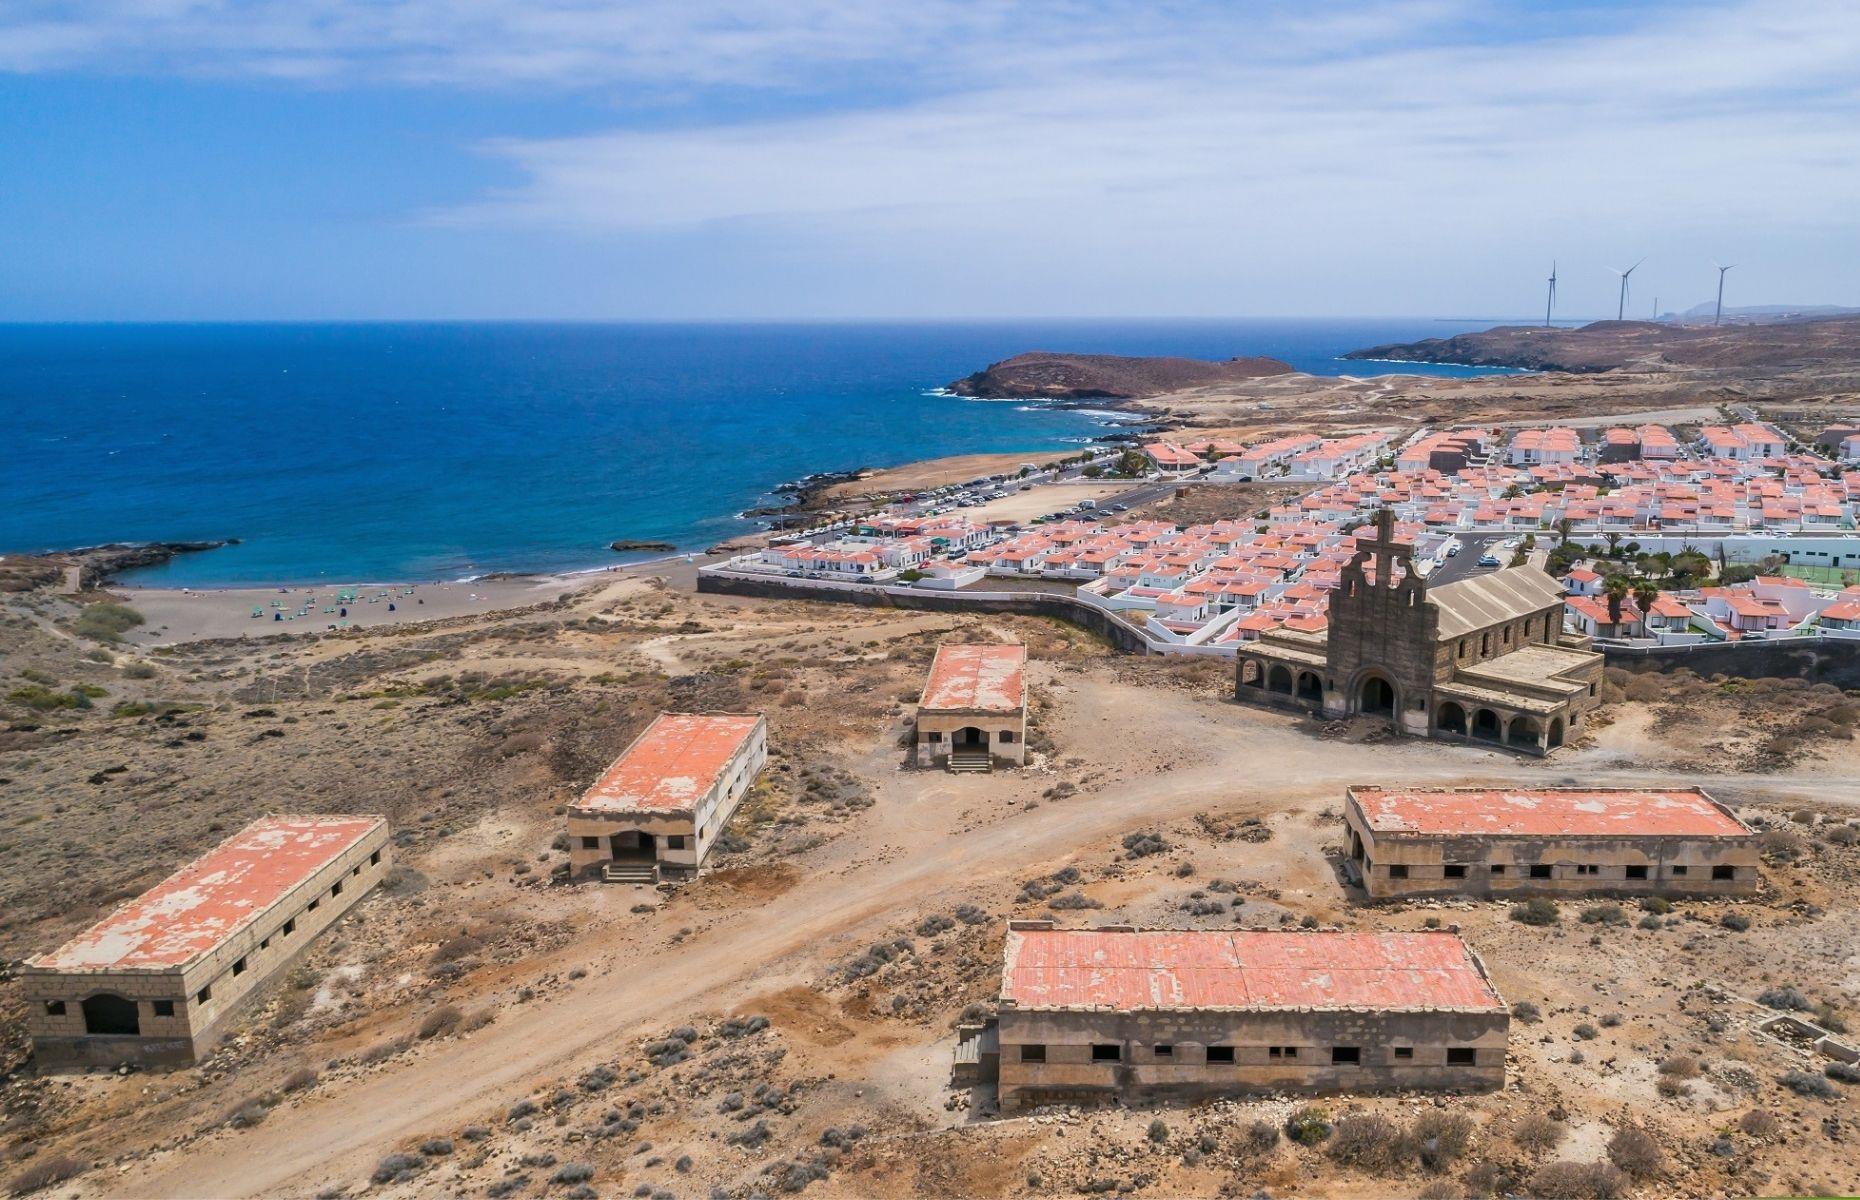 <p>The Spanish island of Tenerife is loved for its rugged volcanic landscape, black-and-white sand beaches and spectacular azure waters, but the picturesque vacation resort also harbors a rather unique addition that very few people know about...</p>